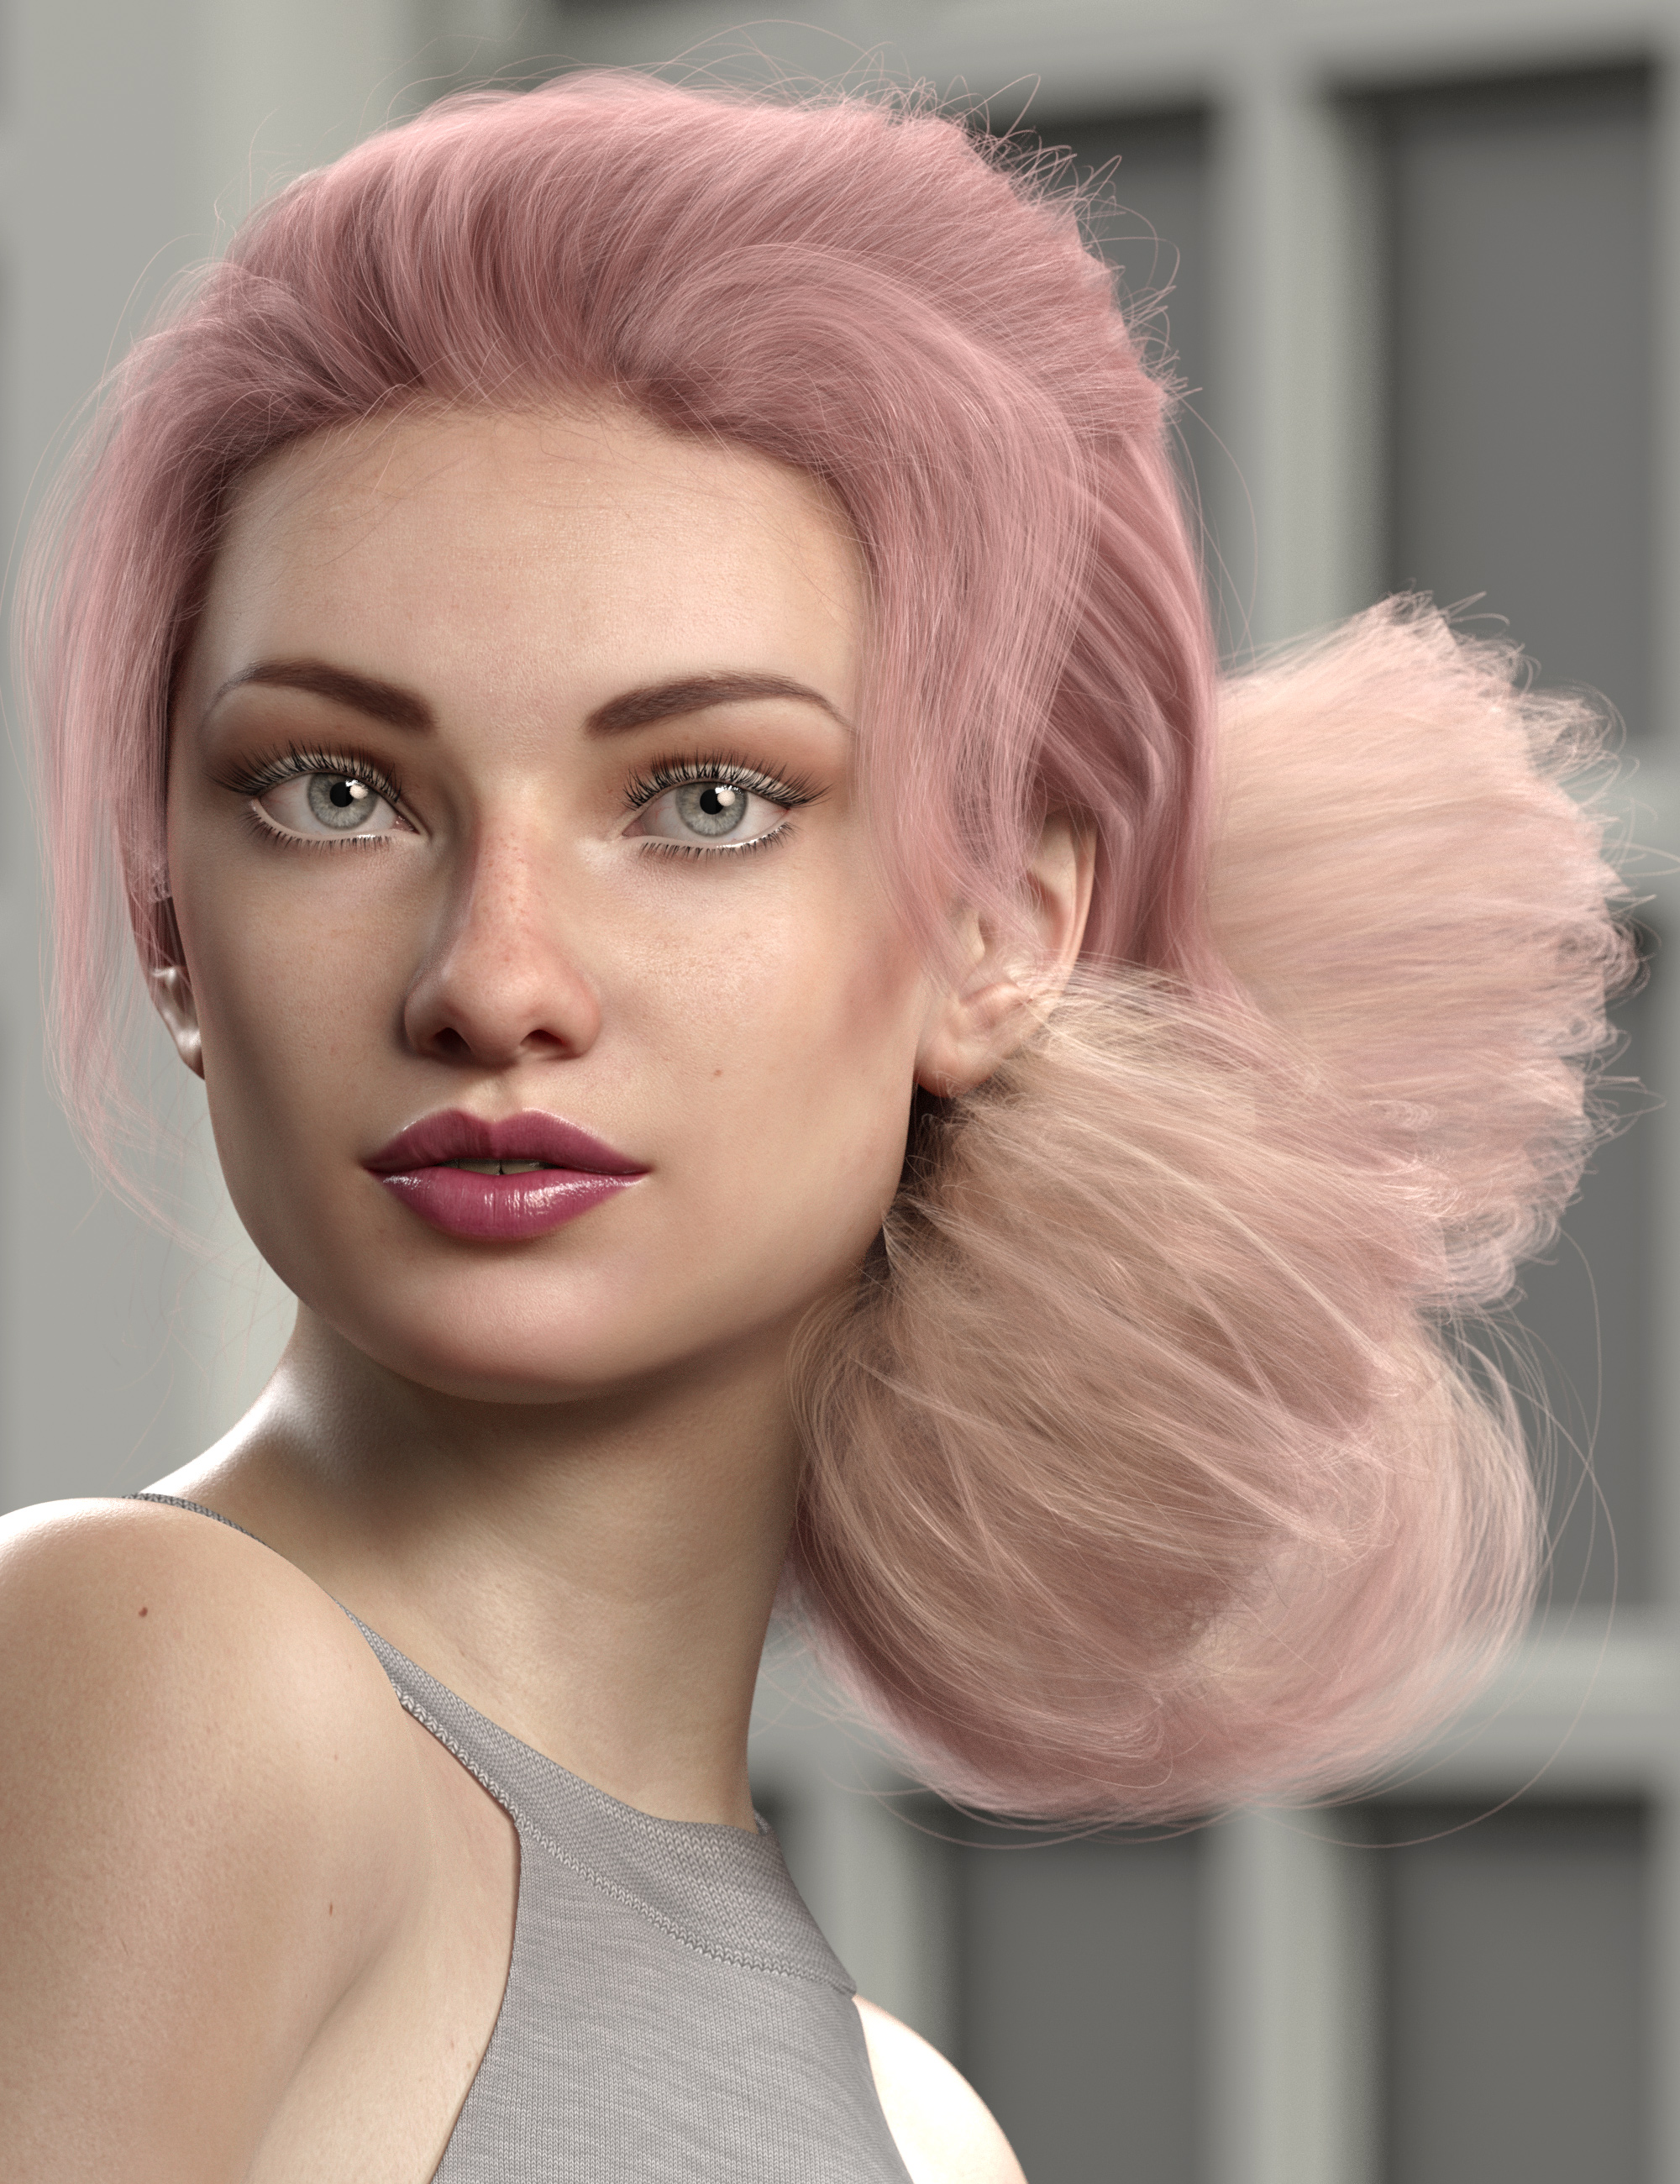 Texture Expansion for Low Updo Hair | Daz 3D